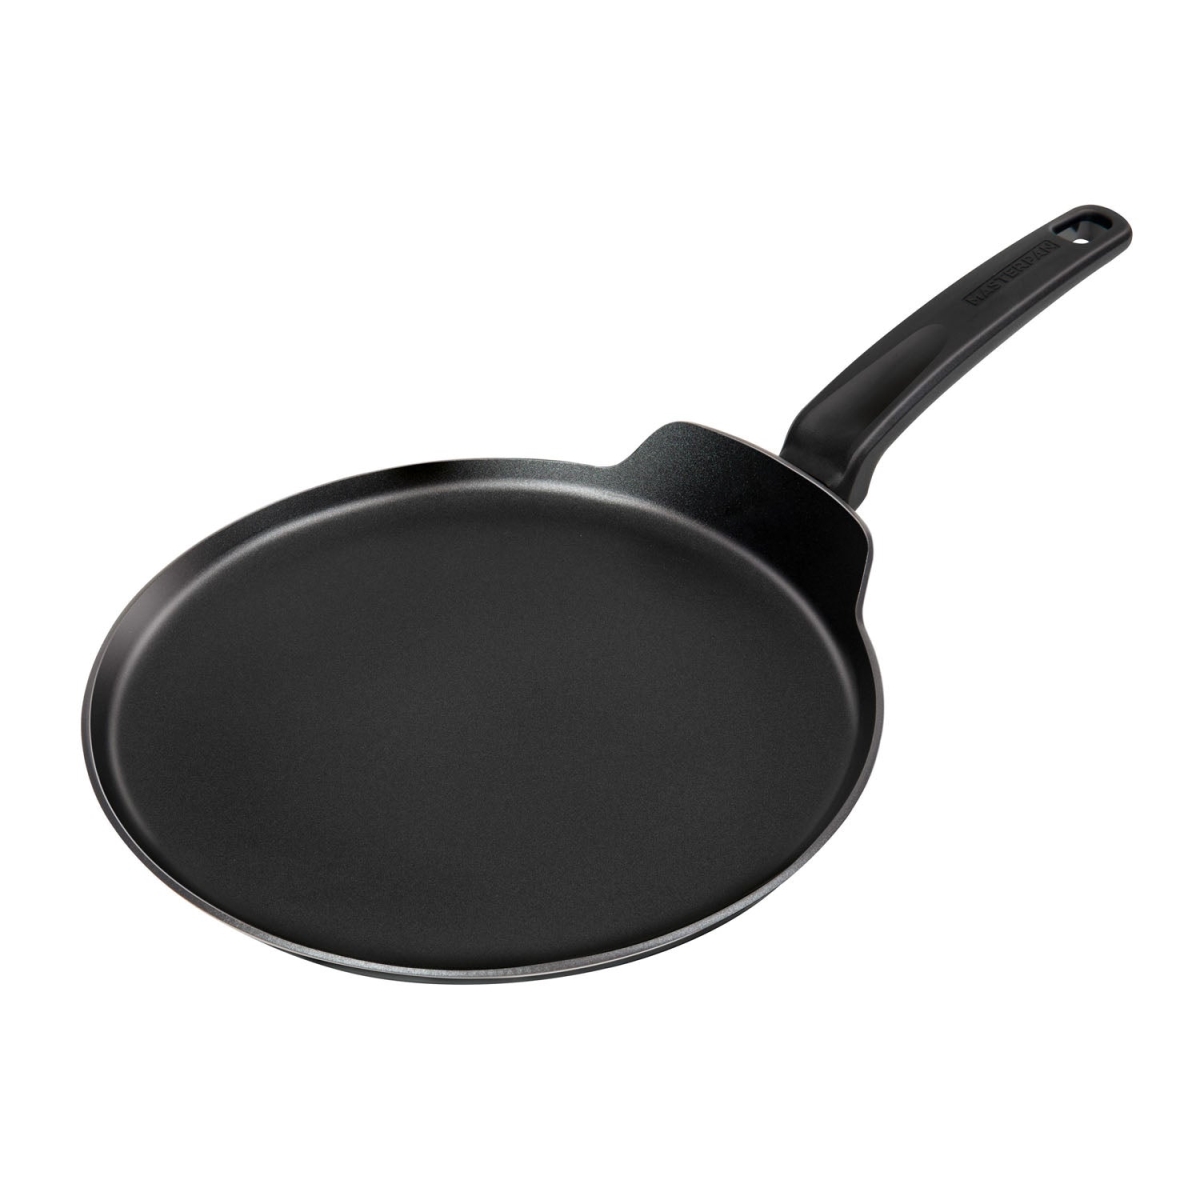 Picture of Masterpan MP-181 11 in. Crepe Pan & Non-Stick Aluminium Cookware with Bakelite Handle